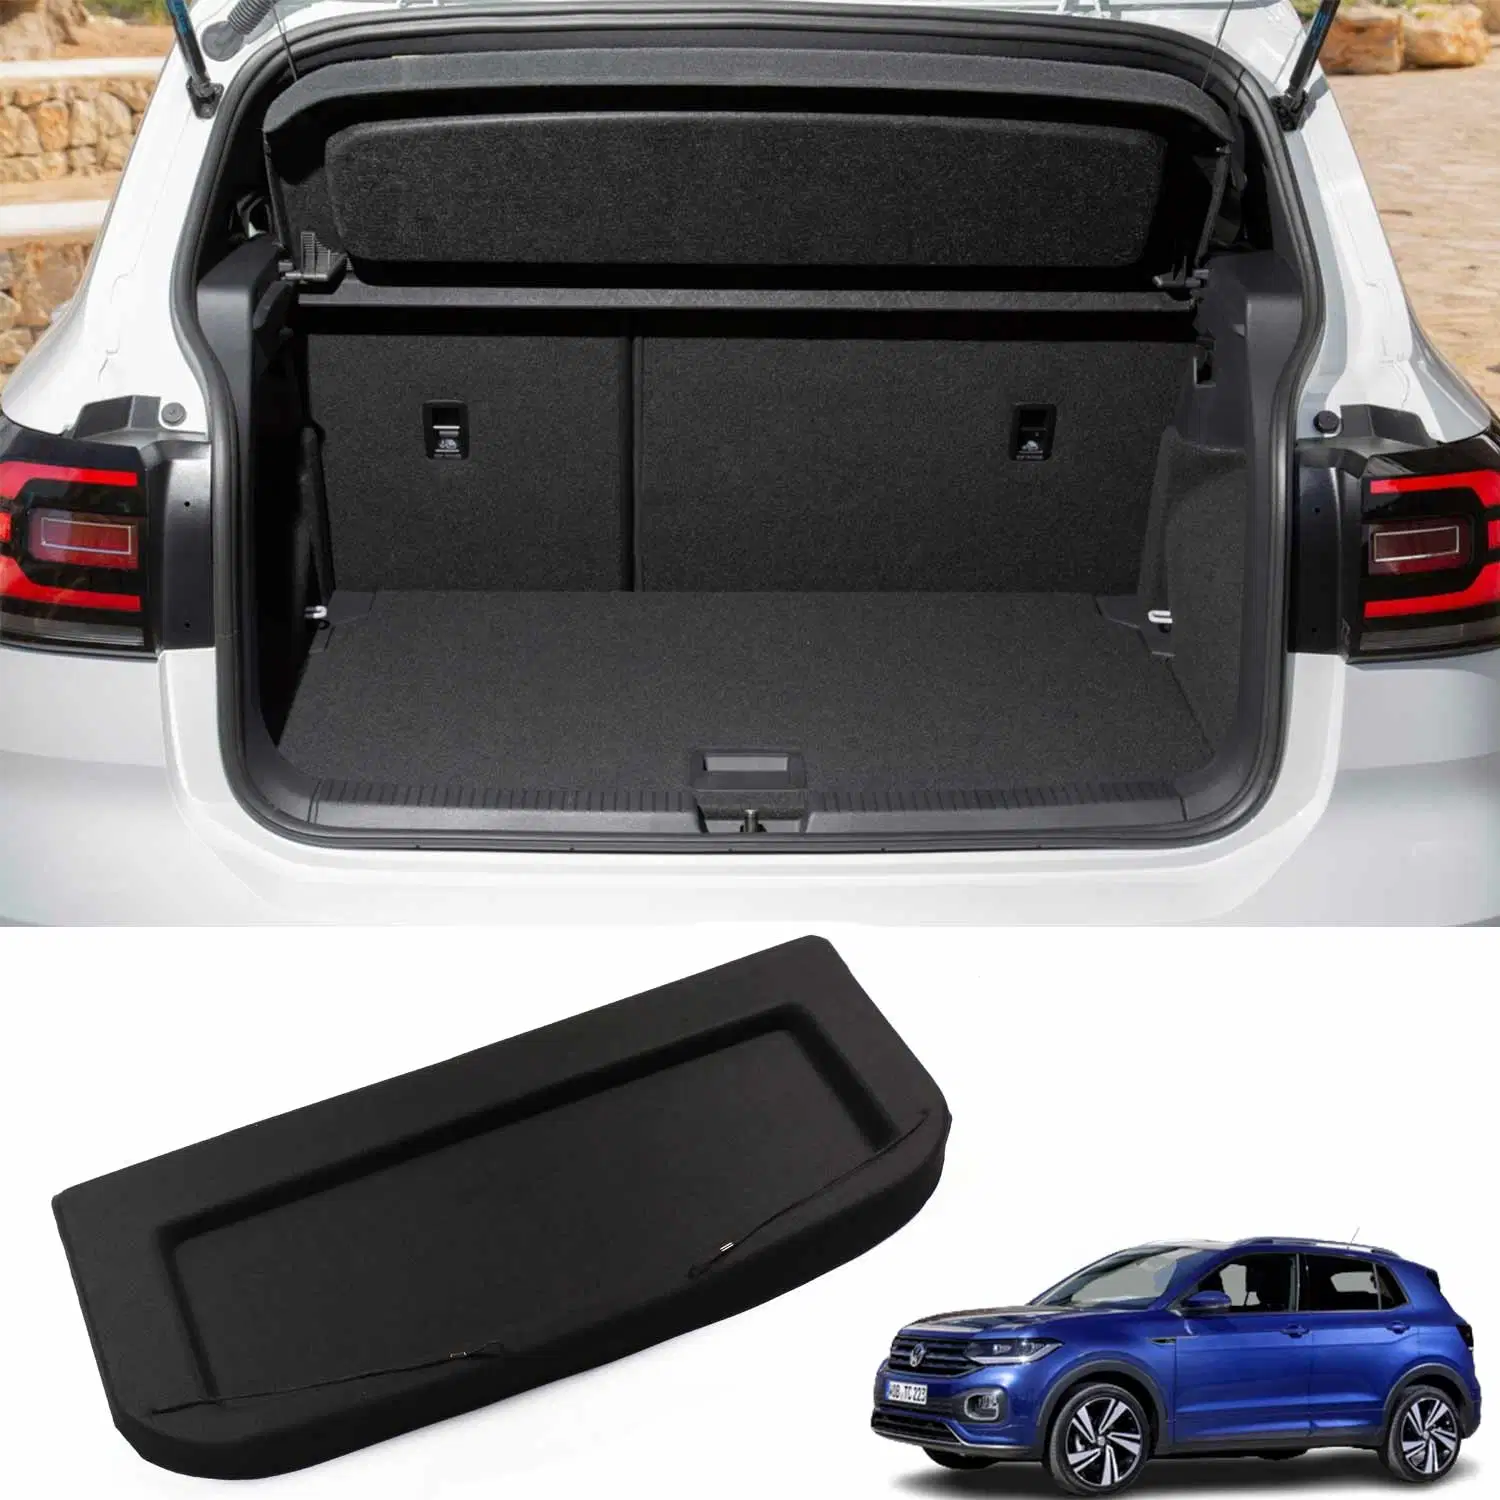 OEM ODM Automotive Retractable Cargo Cover Parcel Shelf Rear Trunk Curtain for BMW Benz Jeep Nissan Toyota Honda Volvo Subura VW Ford.